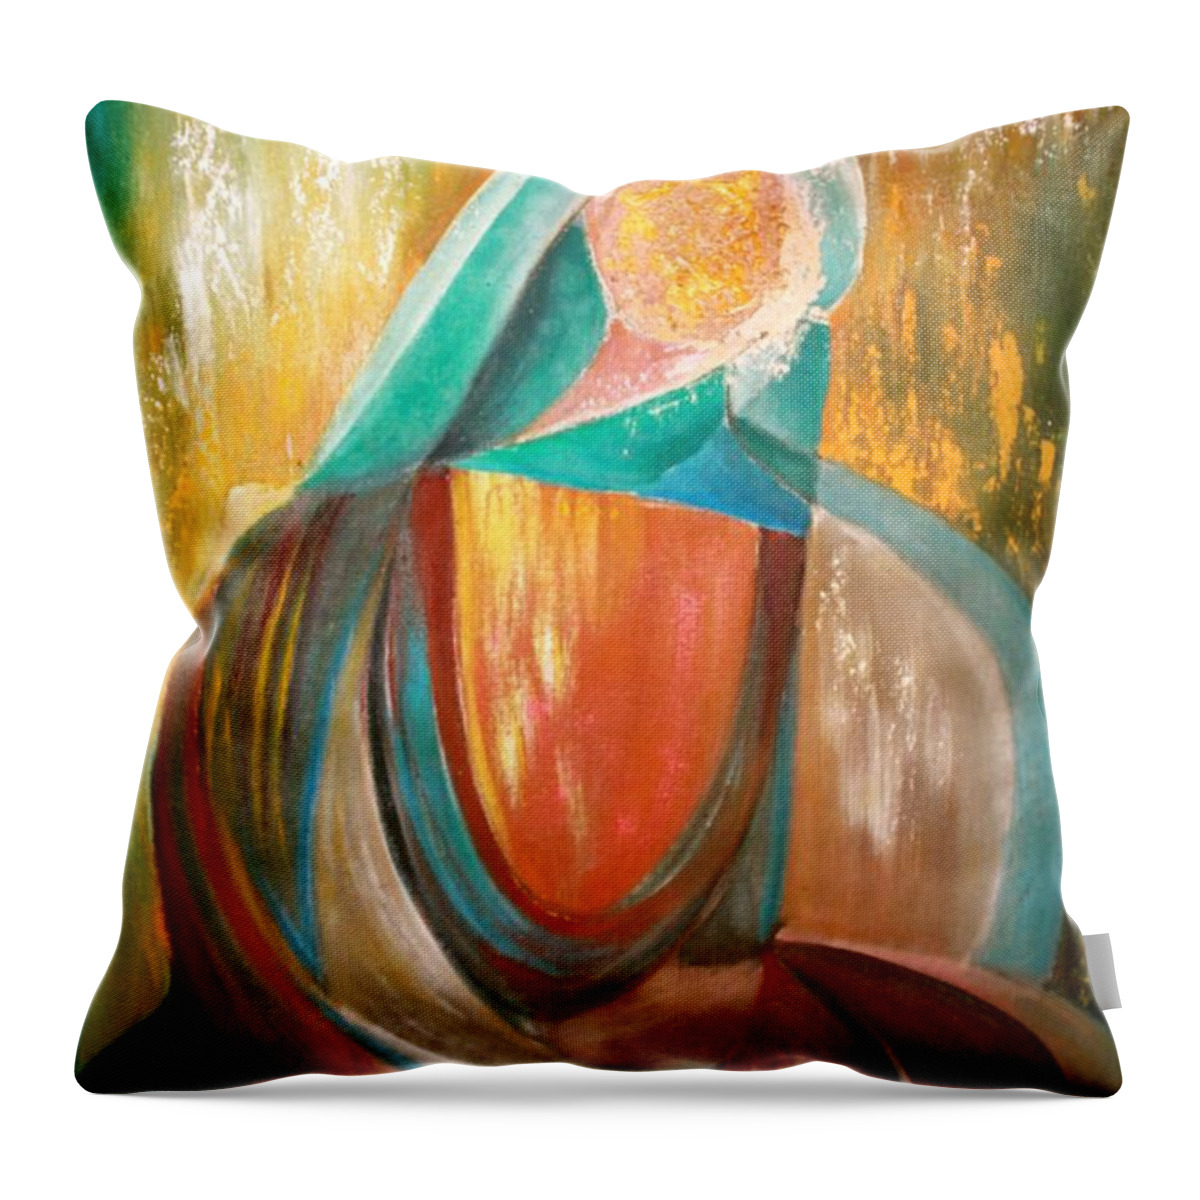 Madonna Throw Pillow featuring the photograph Madonna by Cecilia Orta by Alice Terrill